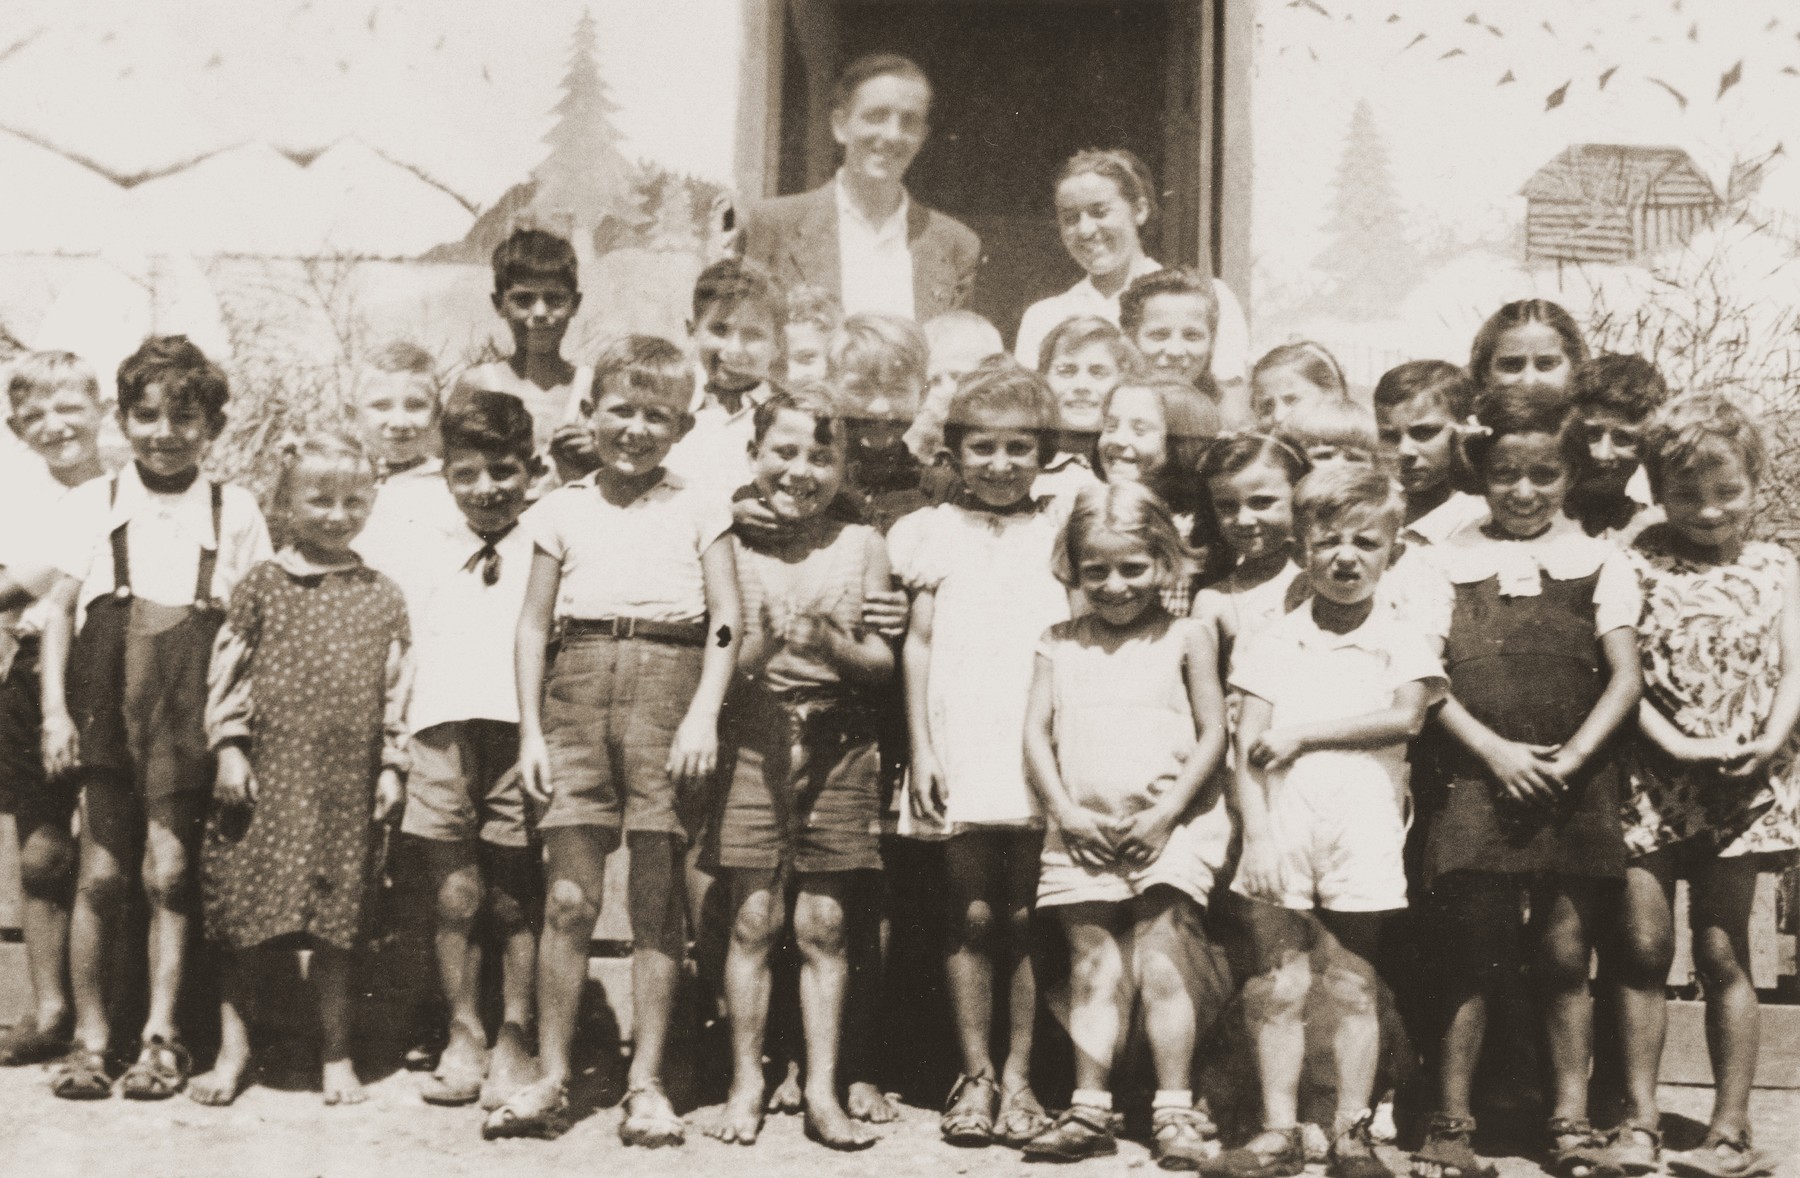 Friedel Reiter and August Bohny pose with a group of children in front of the Secours Suisse barracks in the Rivesaltes internment camp.  

The building is decorated with a mural of the Swiss Alps.